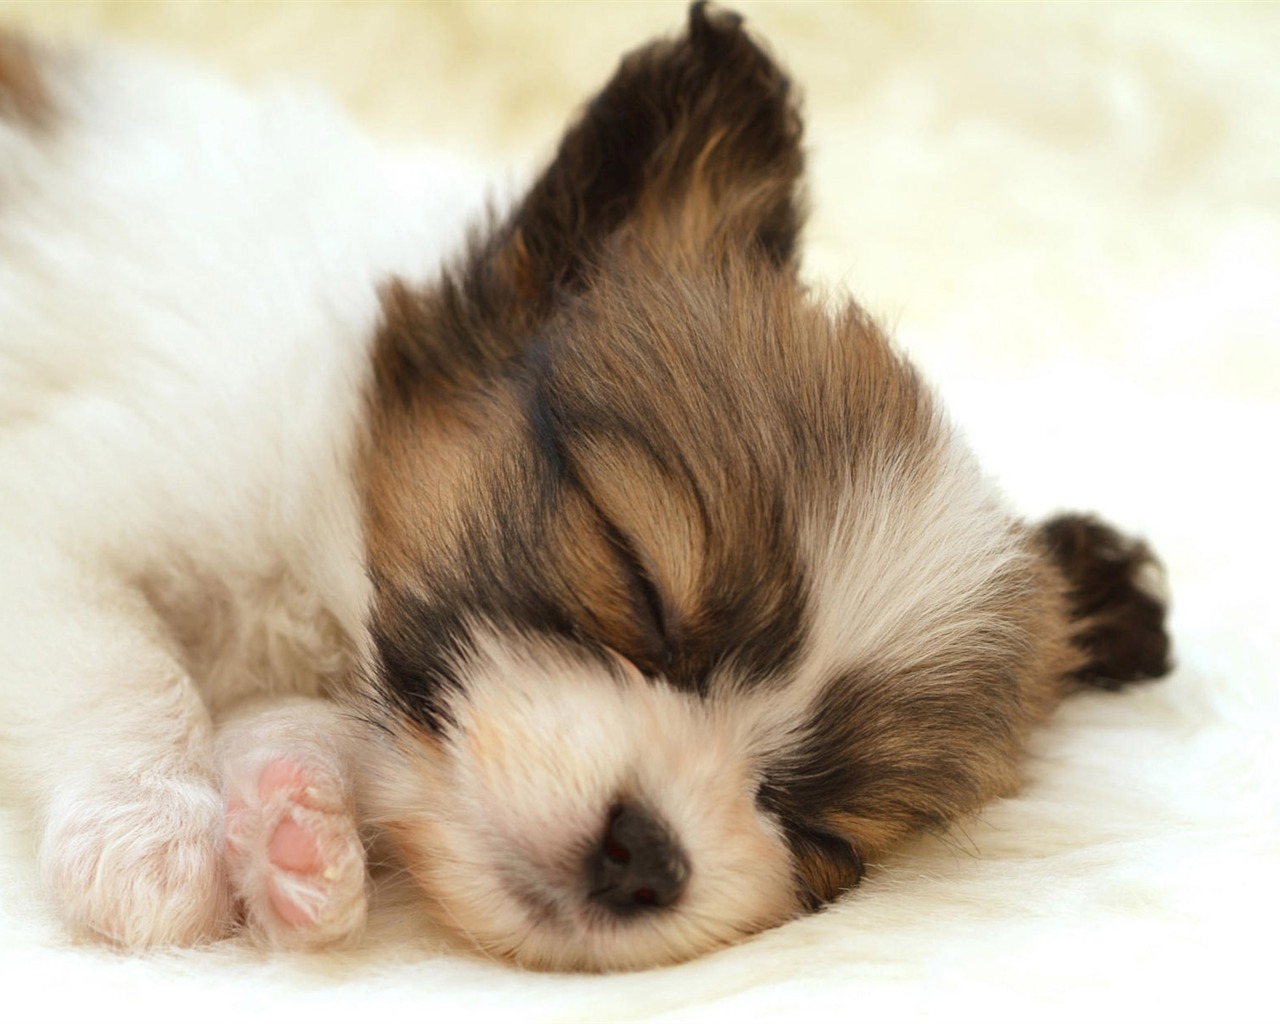 Puppy Photo HD wallpapers (10) #10 - 1280x1024